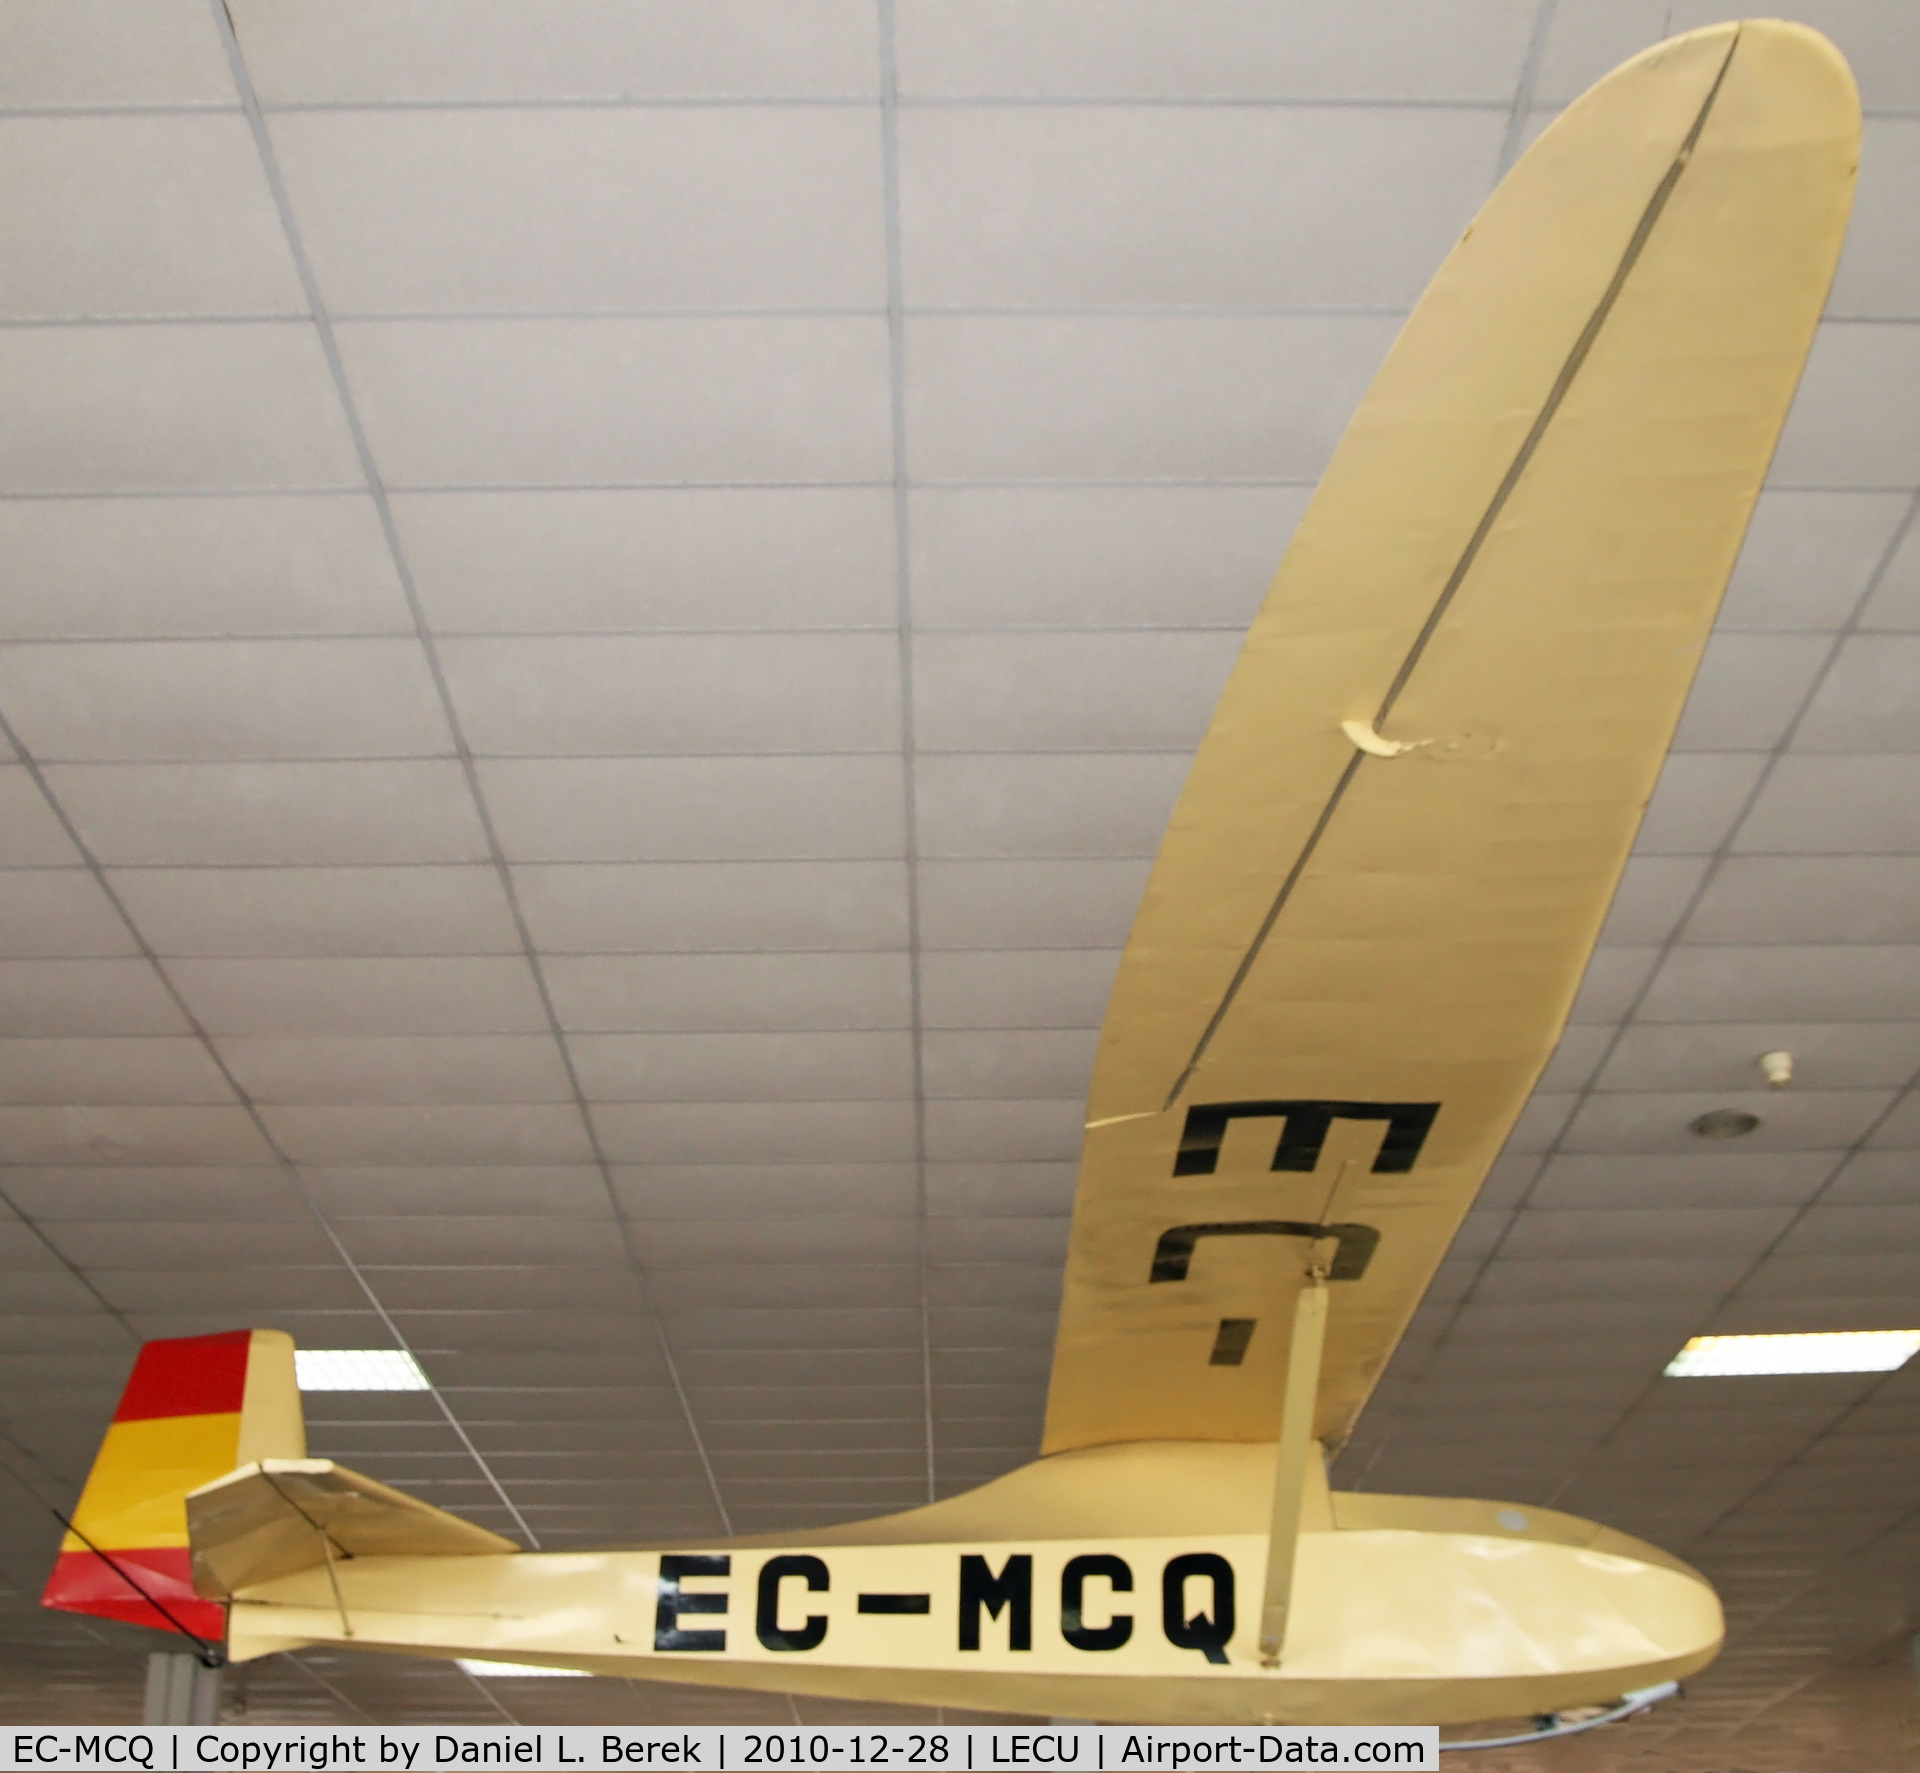 EC-MCQ, 1945 Schneider Grunau Baby C/N Not found EC-MCQ, The original 1933 German glider set a world endurance record.  This Spanish version dates to 1945 and was used for training.